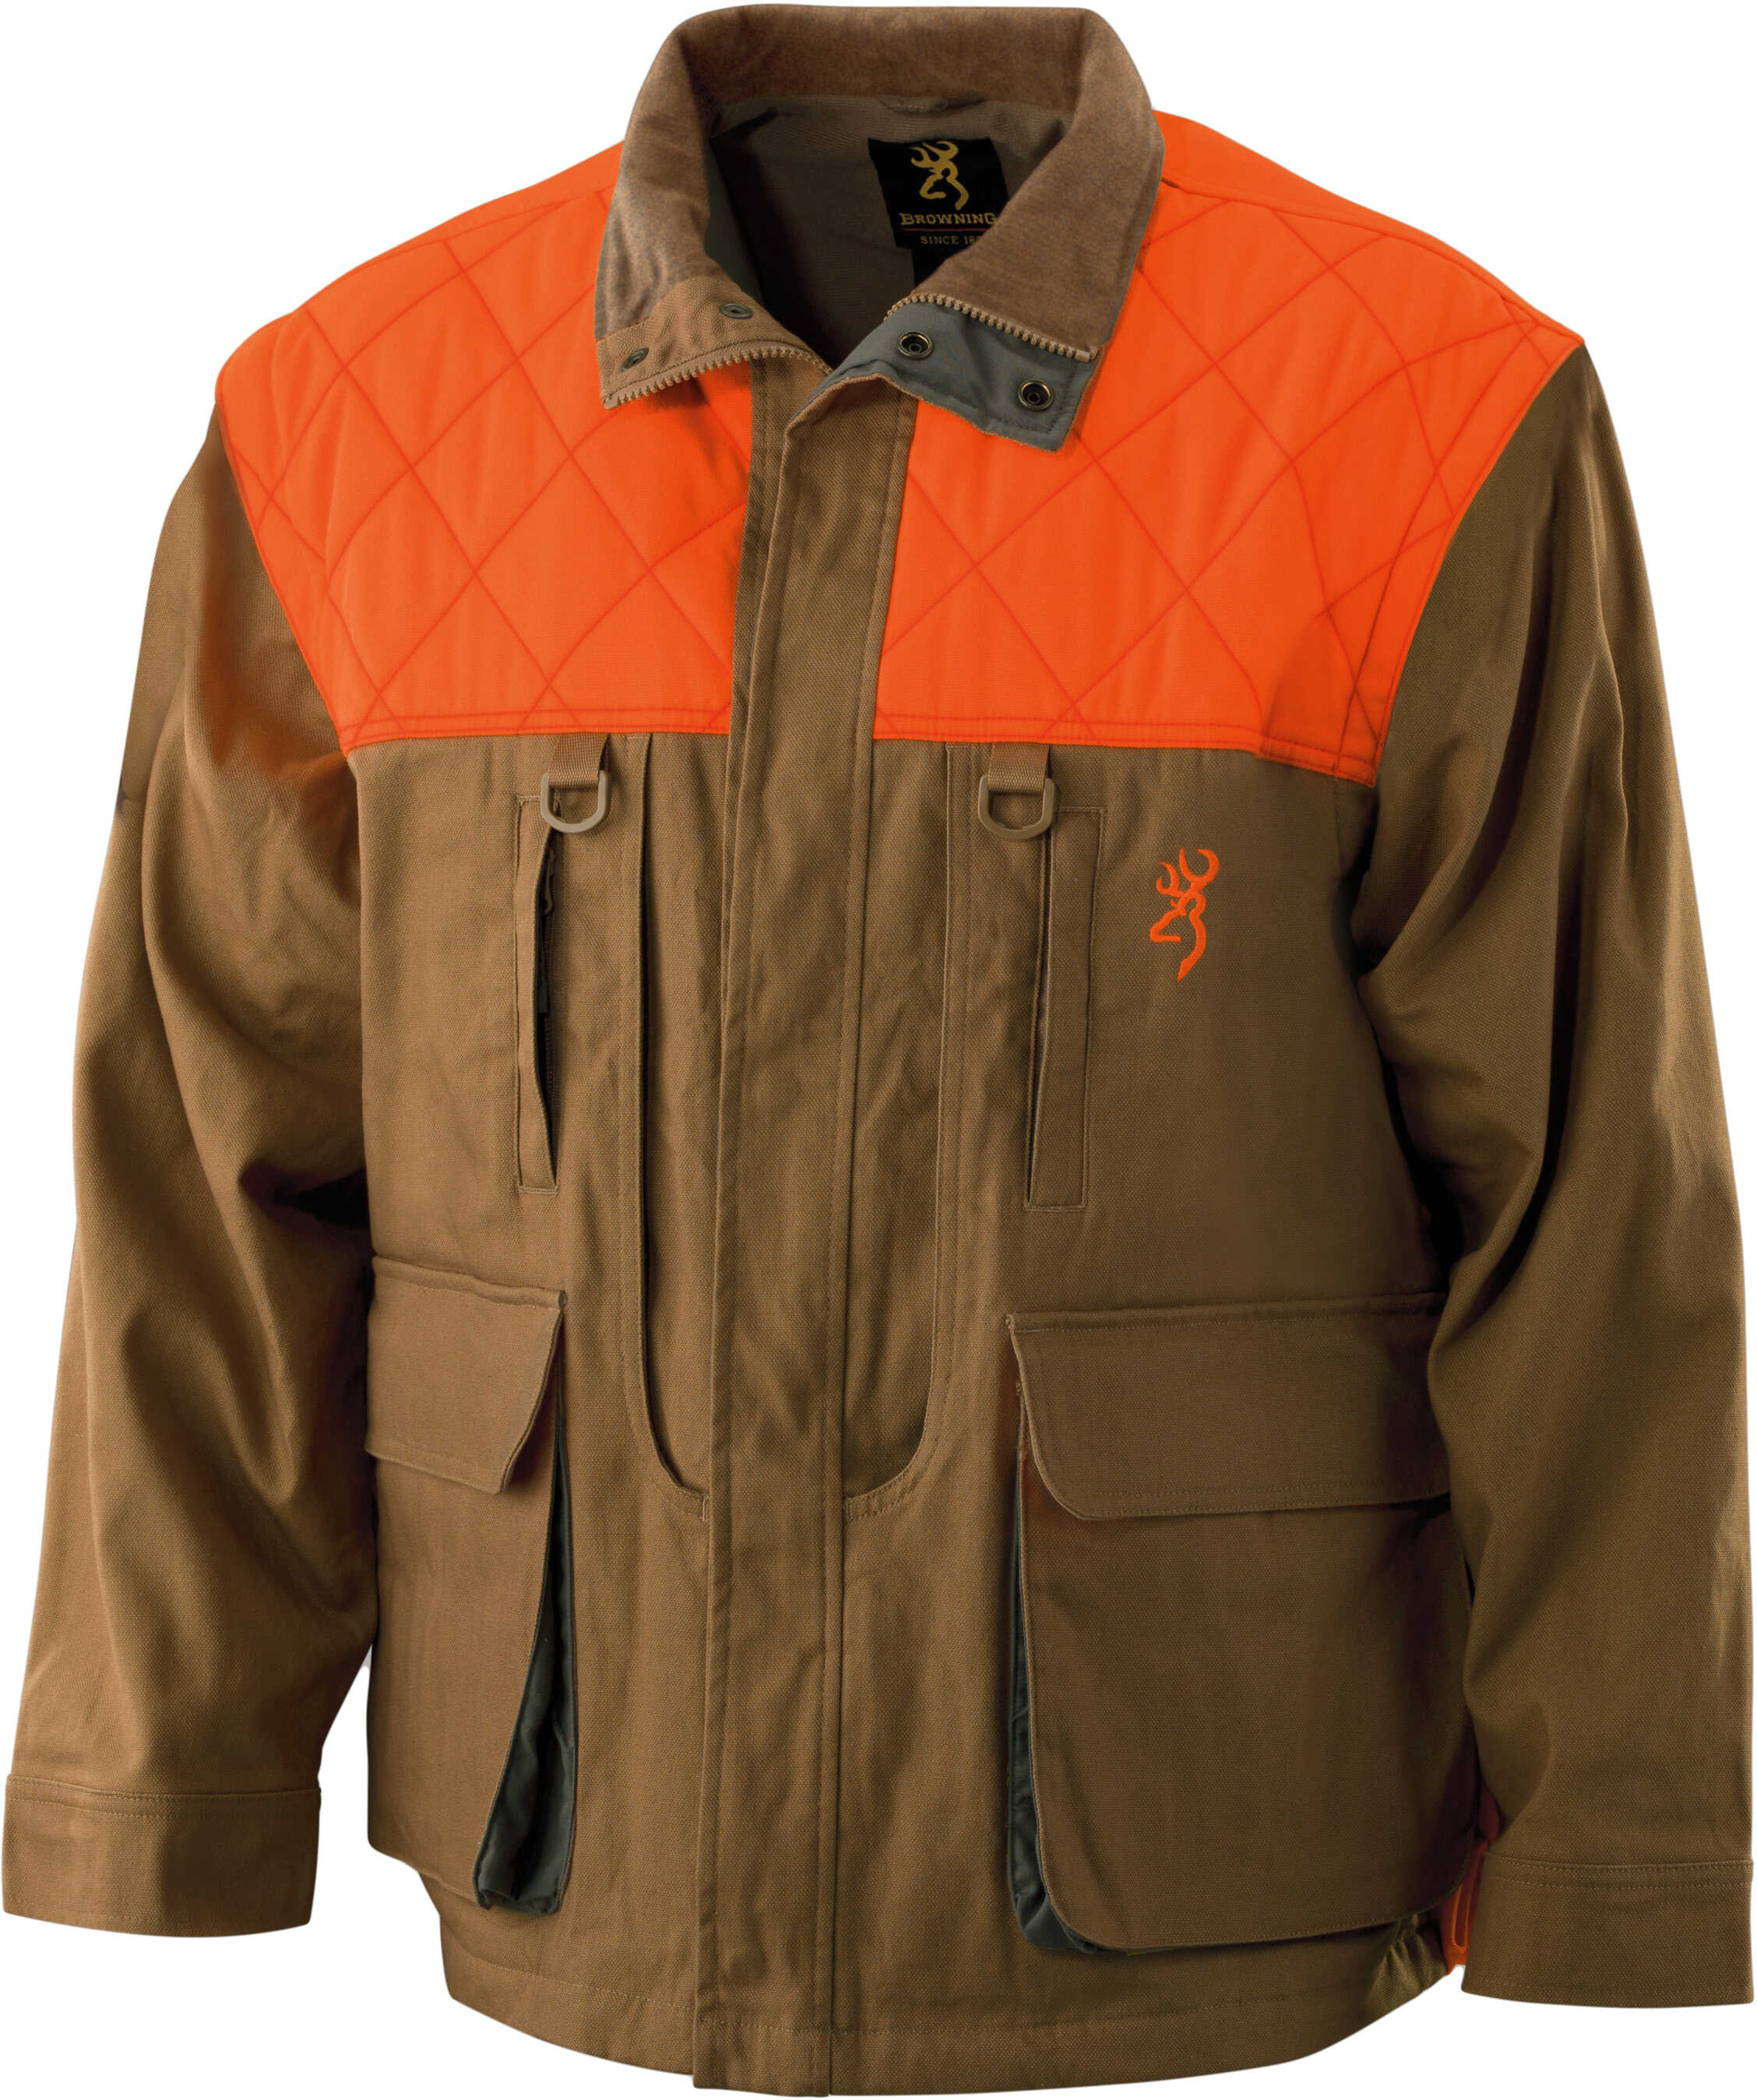 Browning Pheasants Forever Jacket Large Md: 3041163203 - 11040635